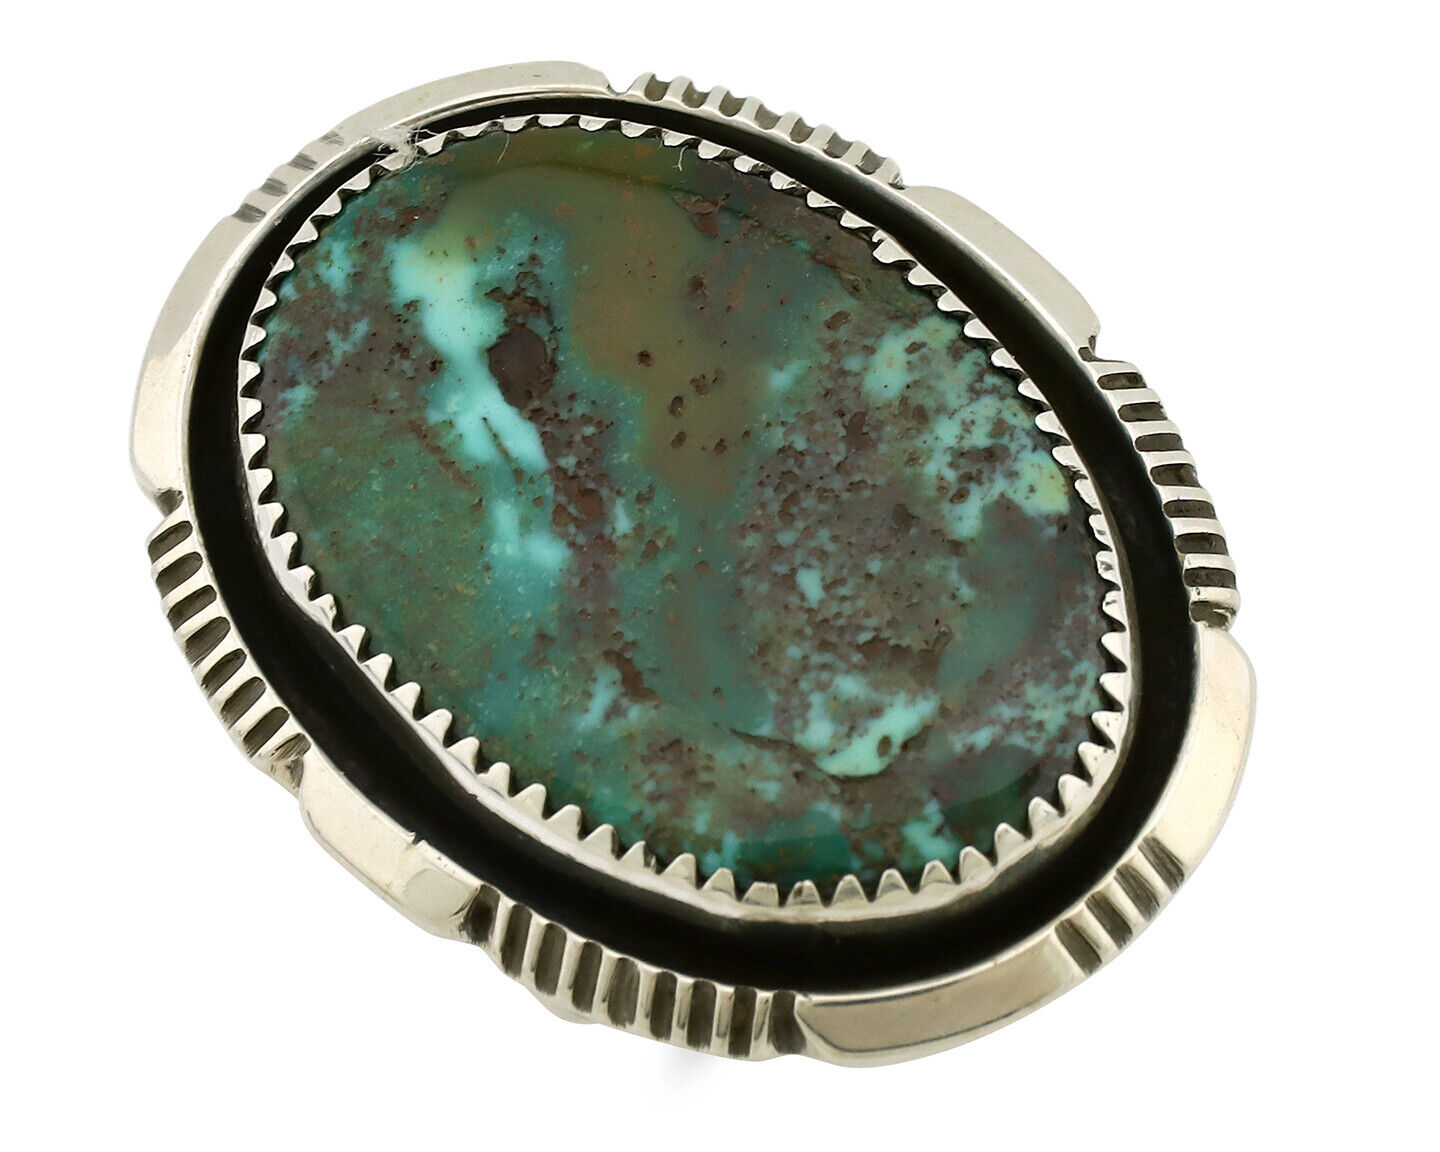 Navajo Ring 925 Silver Natural Southwest Turquoise Signed William Denetdale C80s